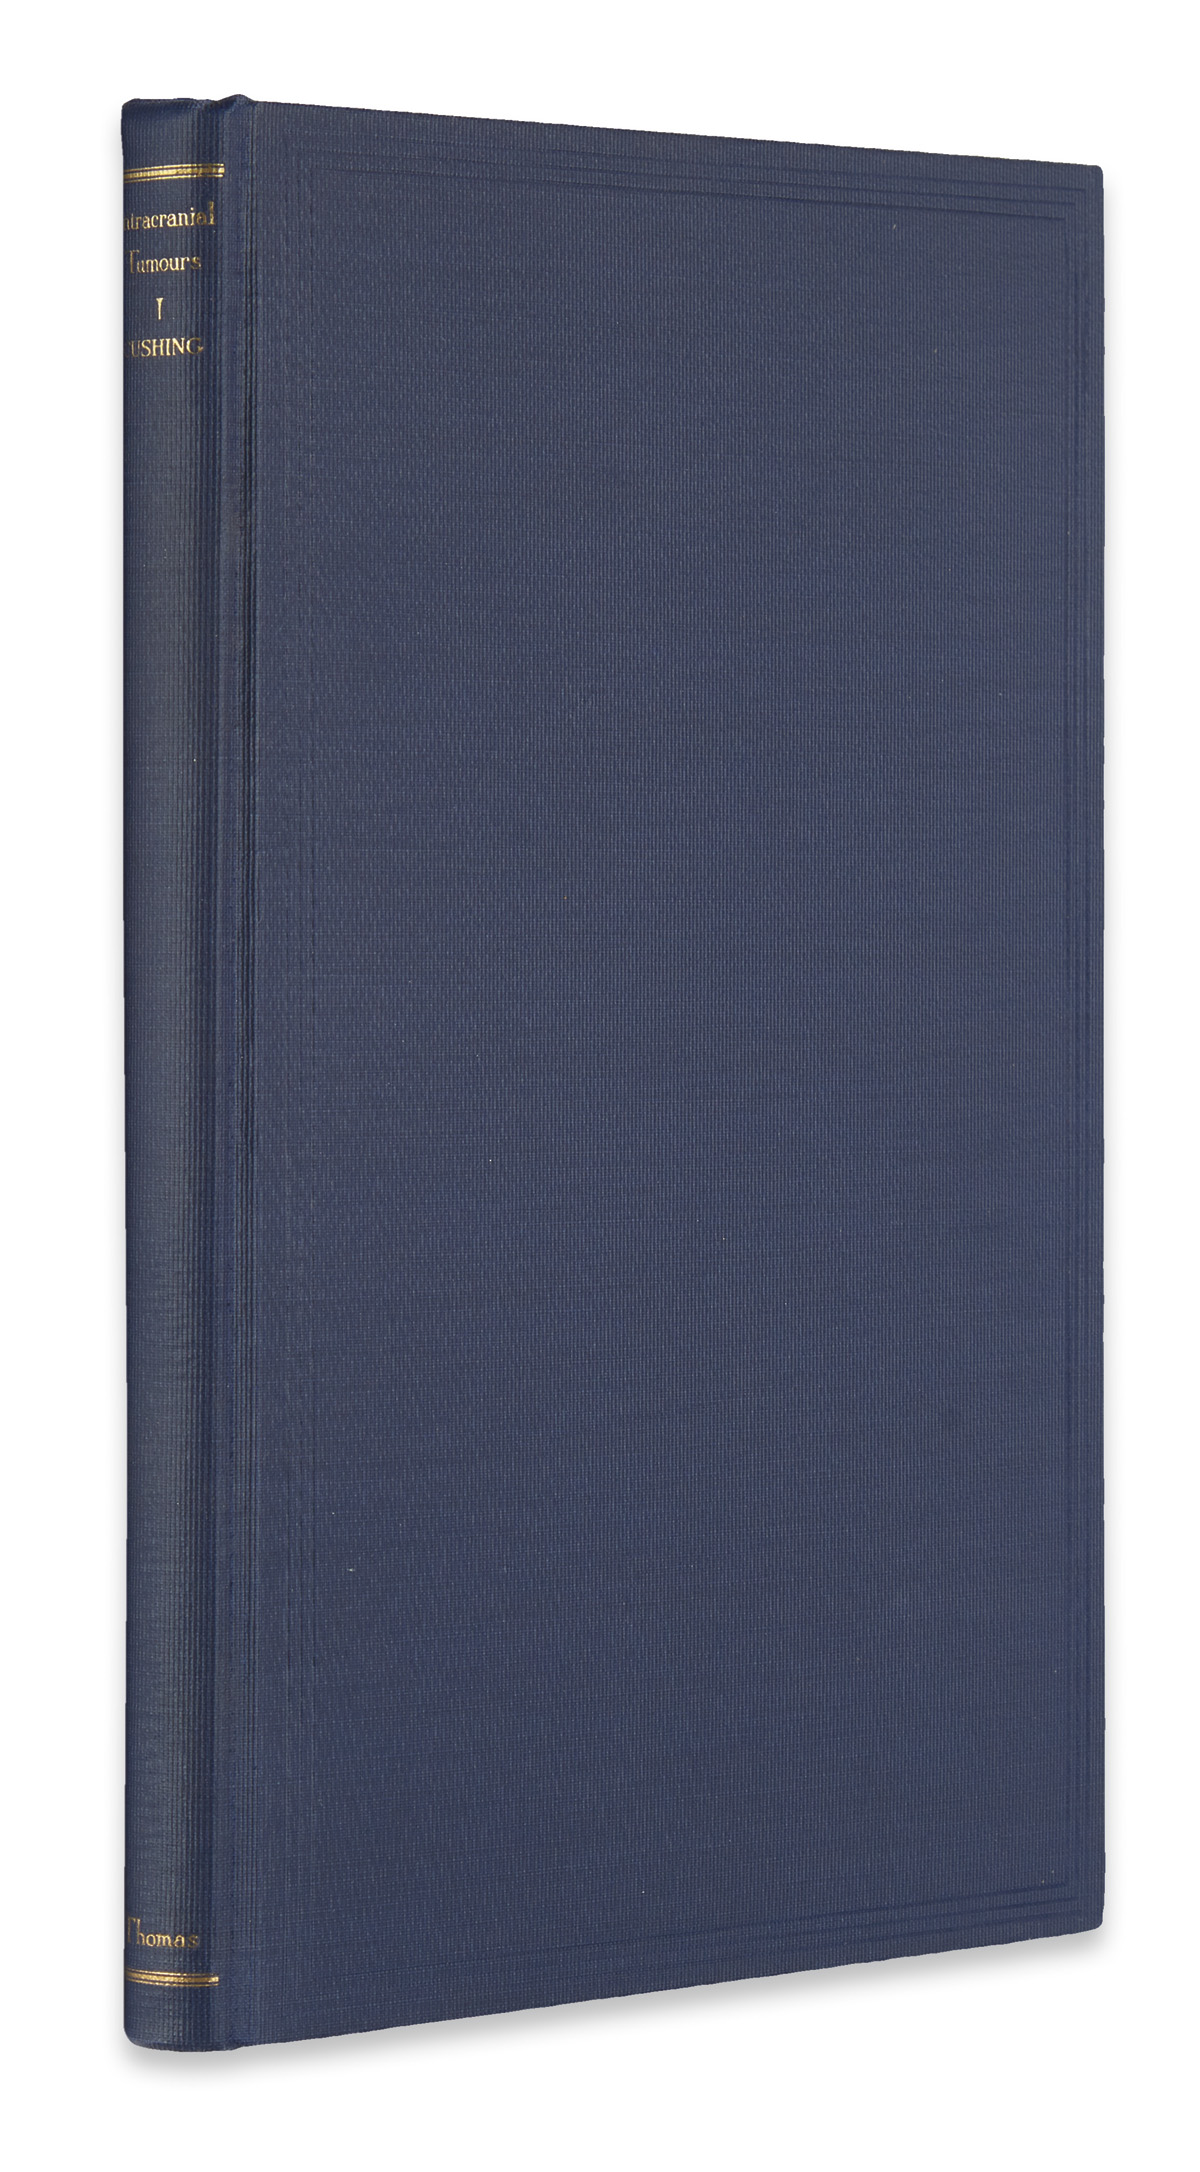 CUSHING, HARVEY.  Intracranial Tumours.  1932.  In dust jacket, and inscribed and signed by Cushing.